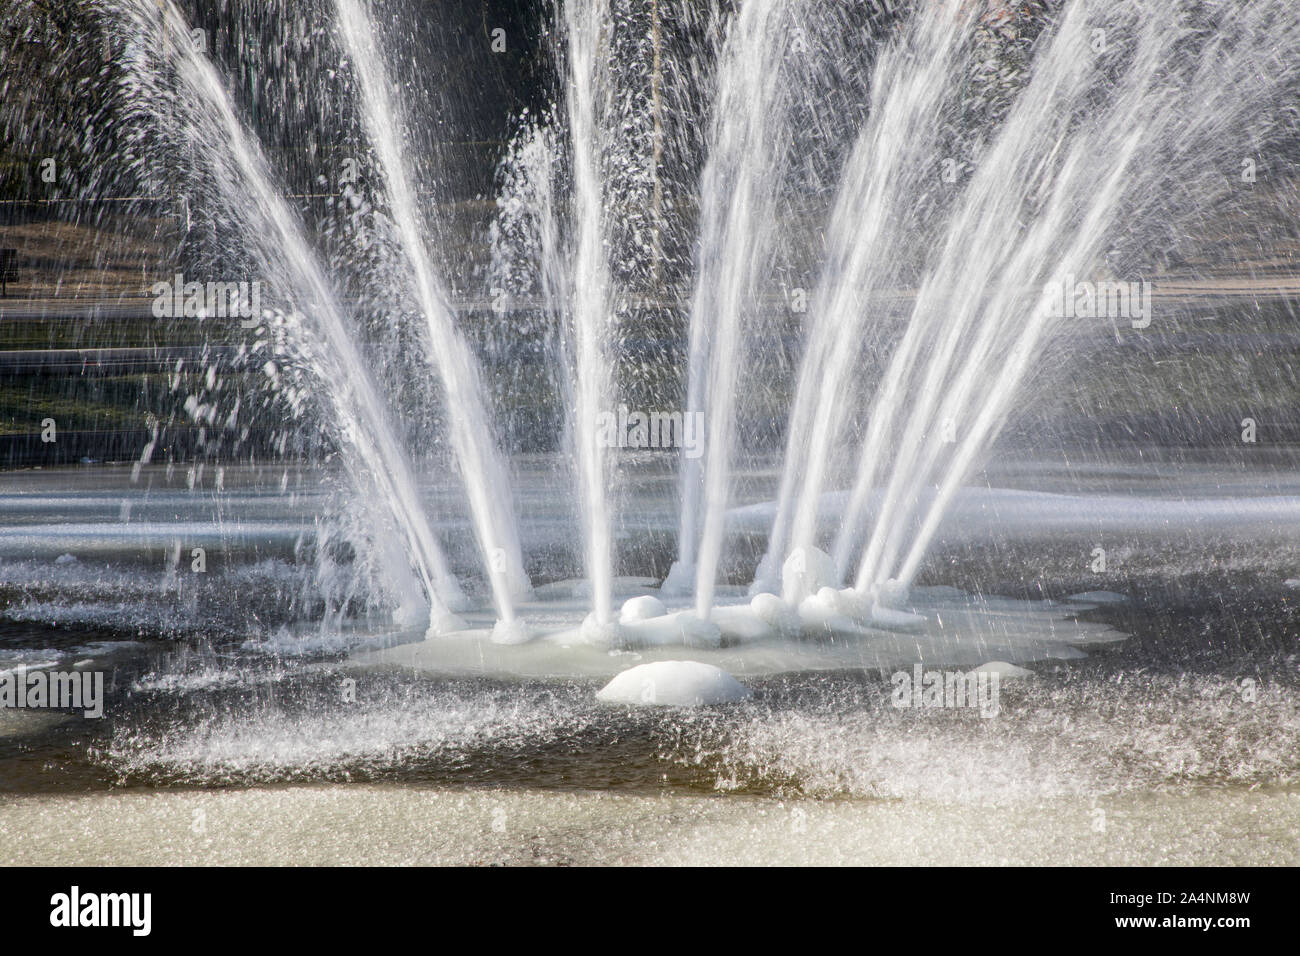 Fountain, water fountain, winter, partly frozen water at minus temperatures, Stock Photo